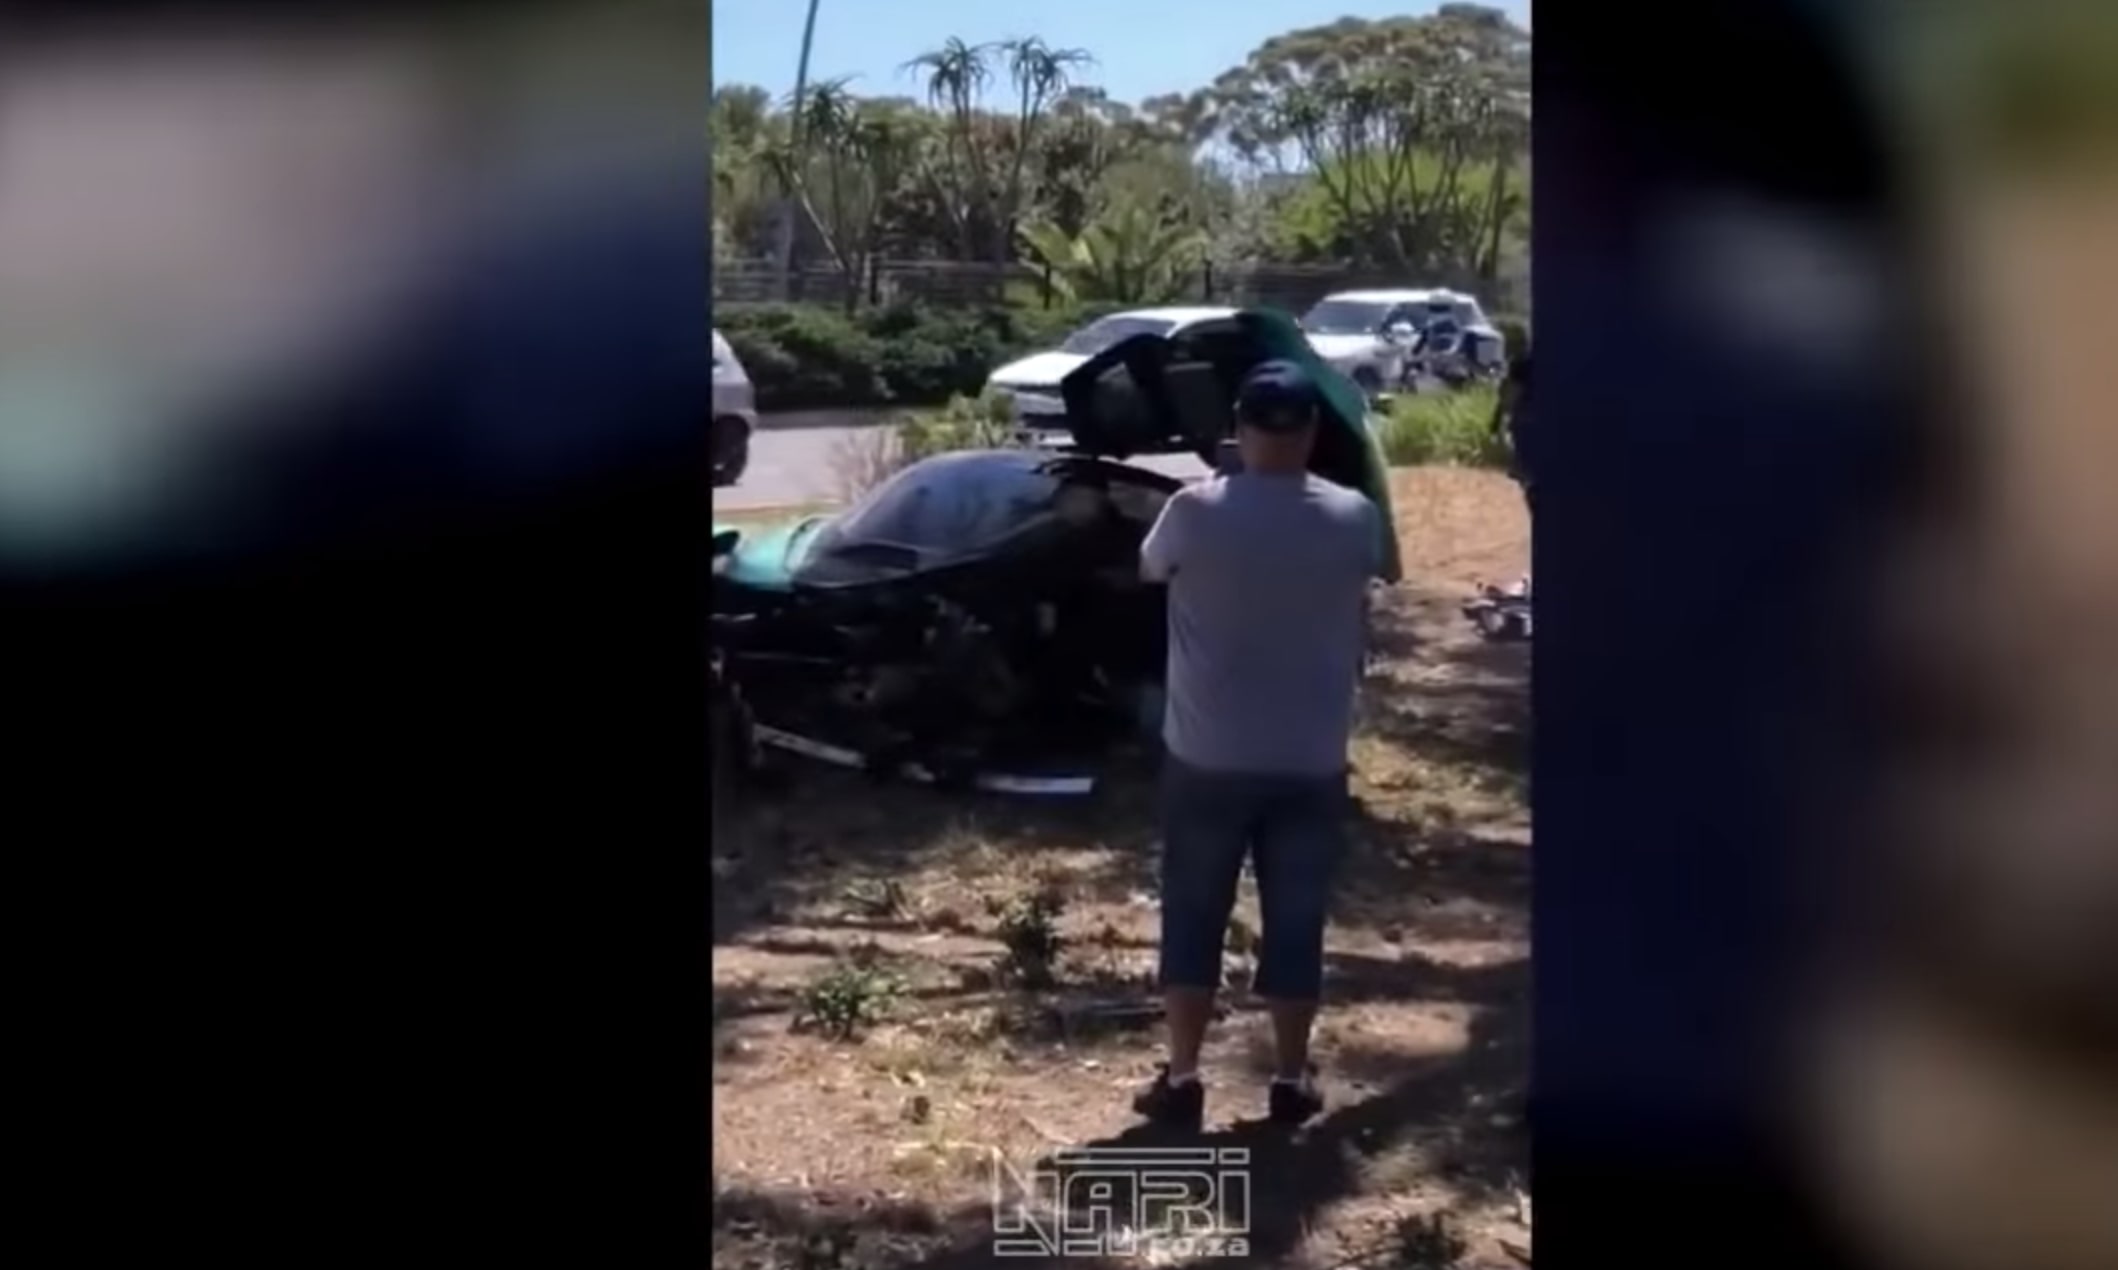 McLaren driver crashes after allegedly dicing with Lamborghini motorist